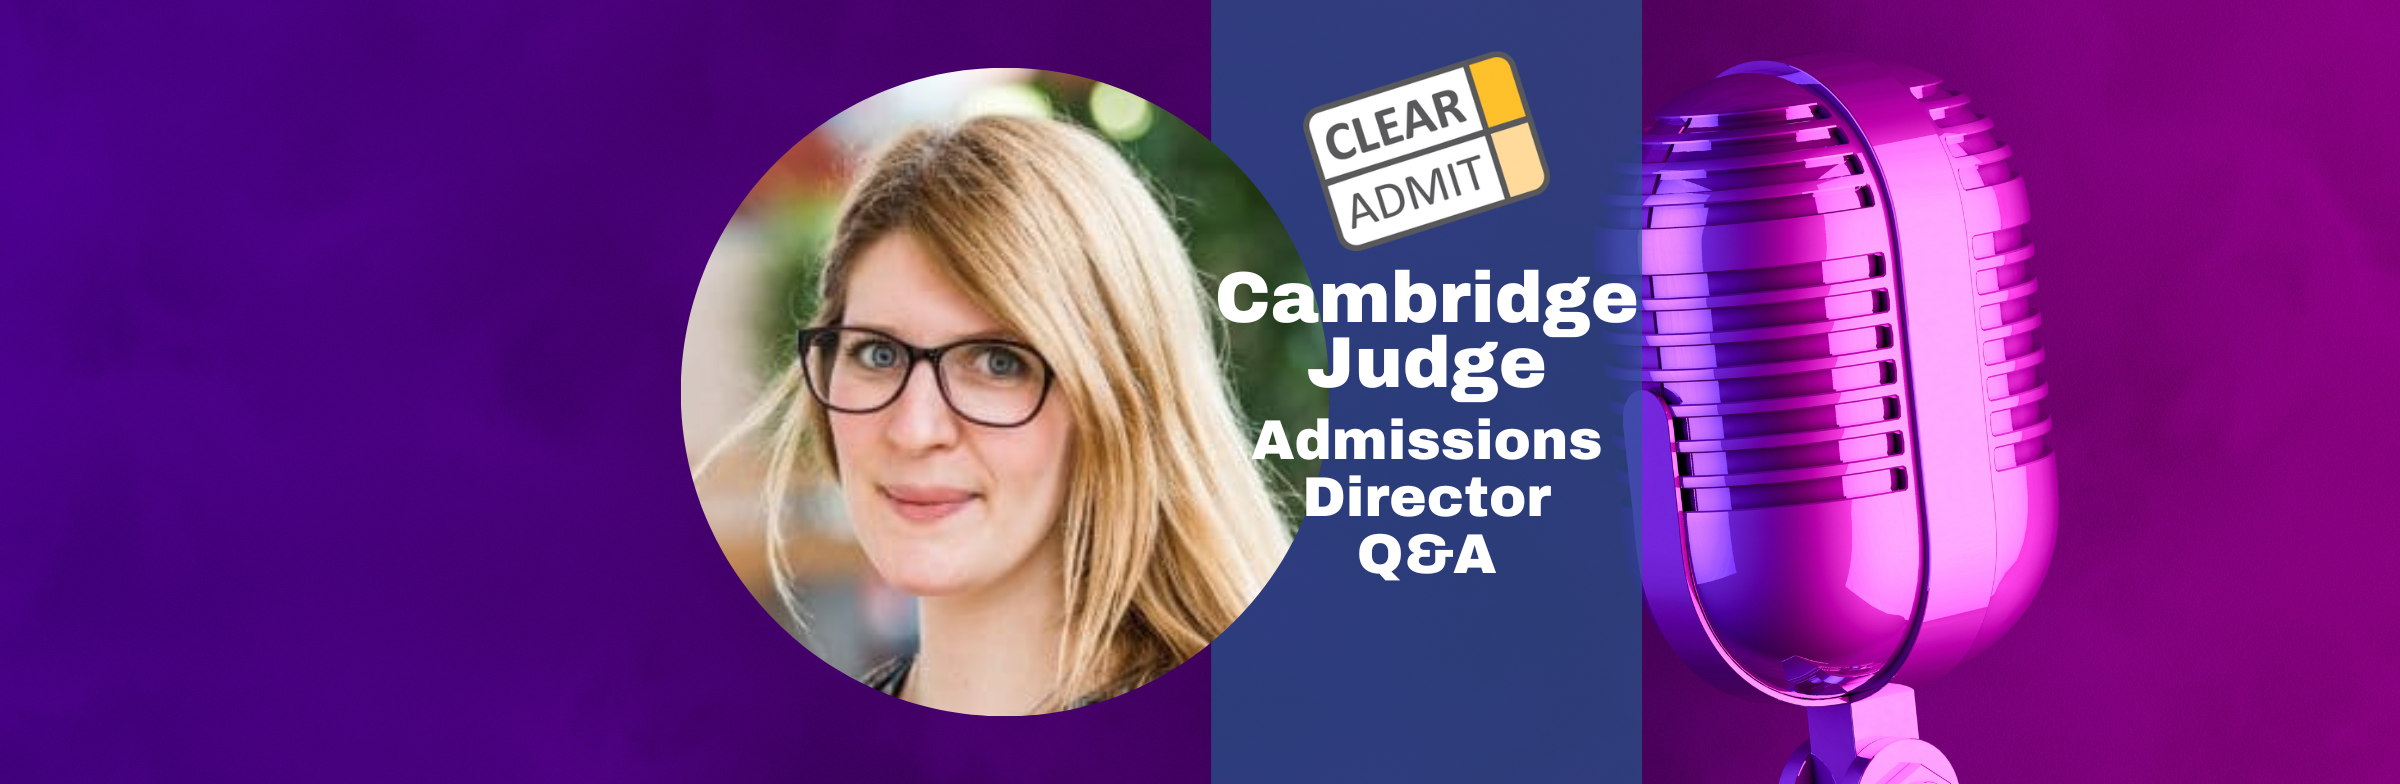 Image for Admissions Director Q&A: Charlotte Russell-Green of Cambridge Judge